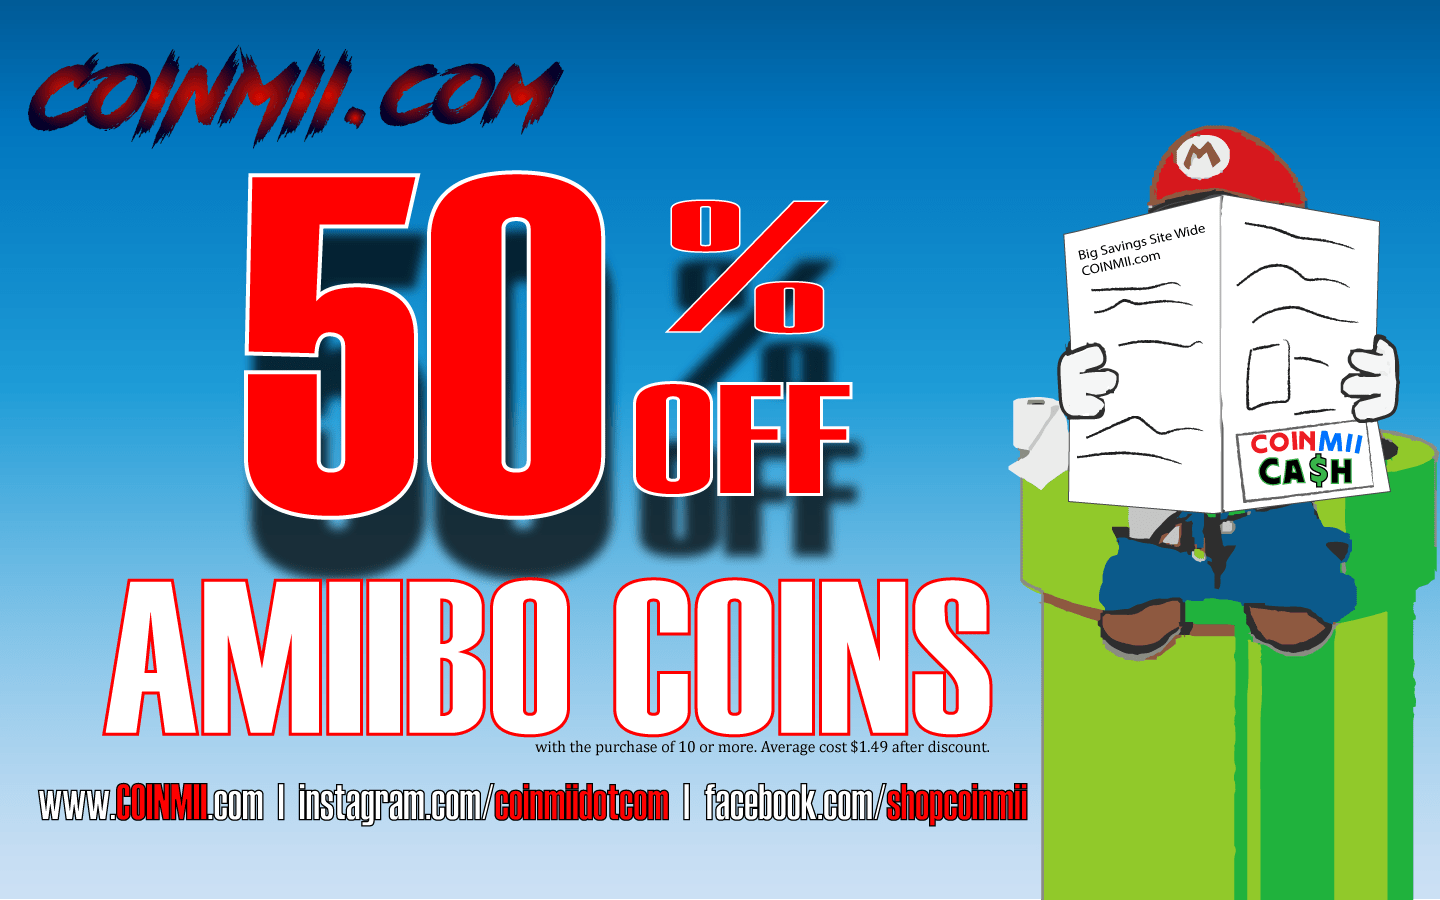 Build Your Collection and Save Money – Get 50% off when you Buy 10 or More Amiibo Coins!